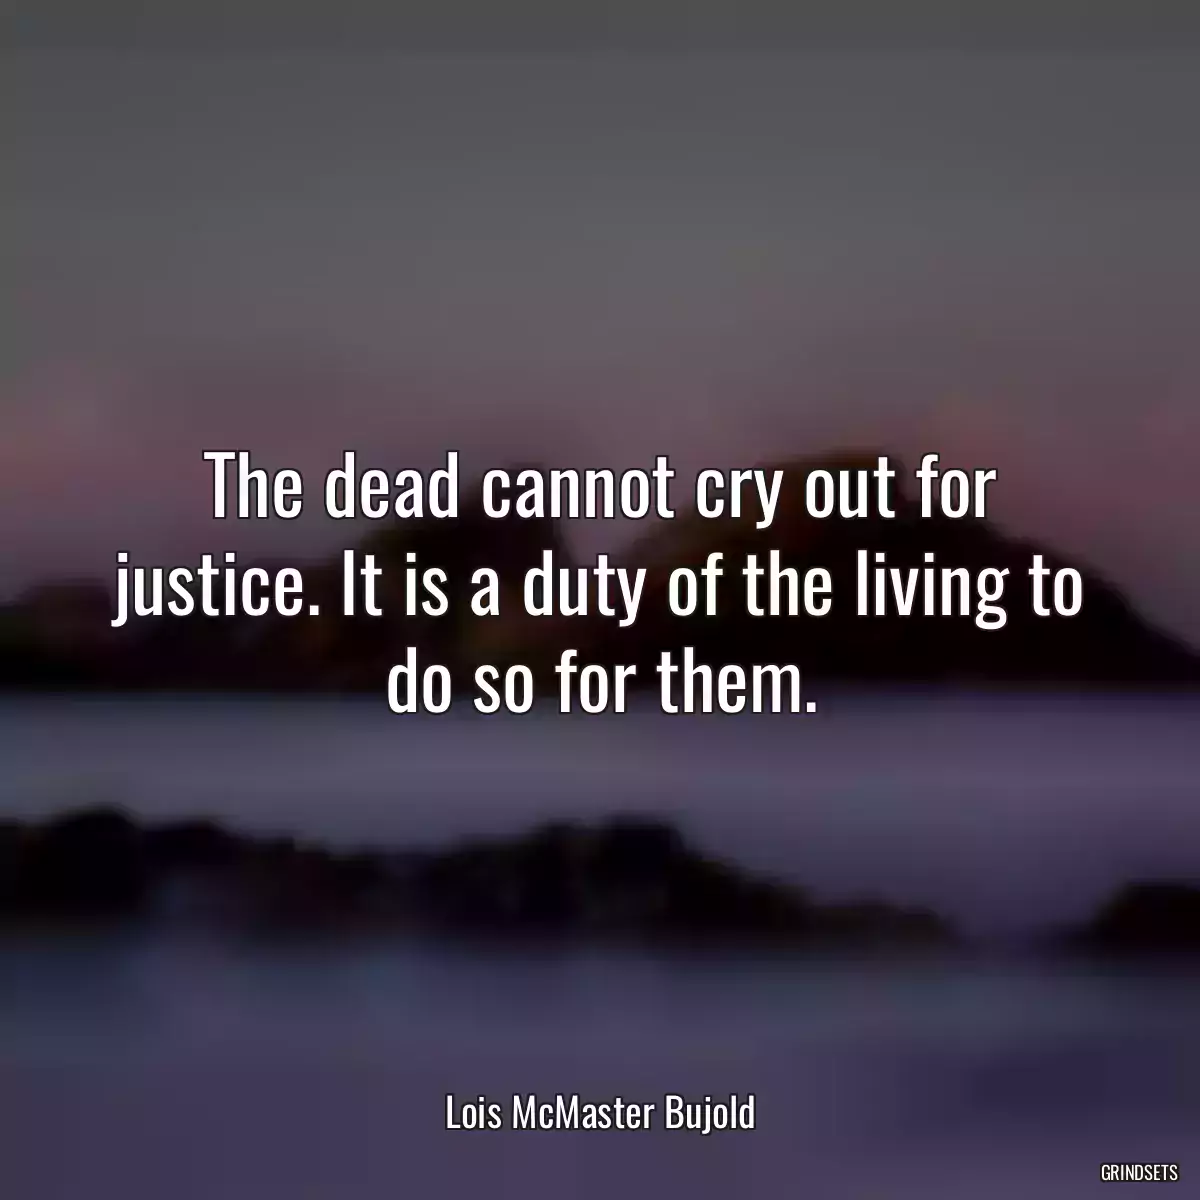 The dead cannot cry out for justice. It is a duty of the living to do so for them.